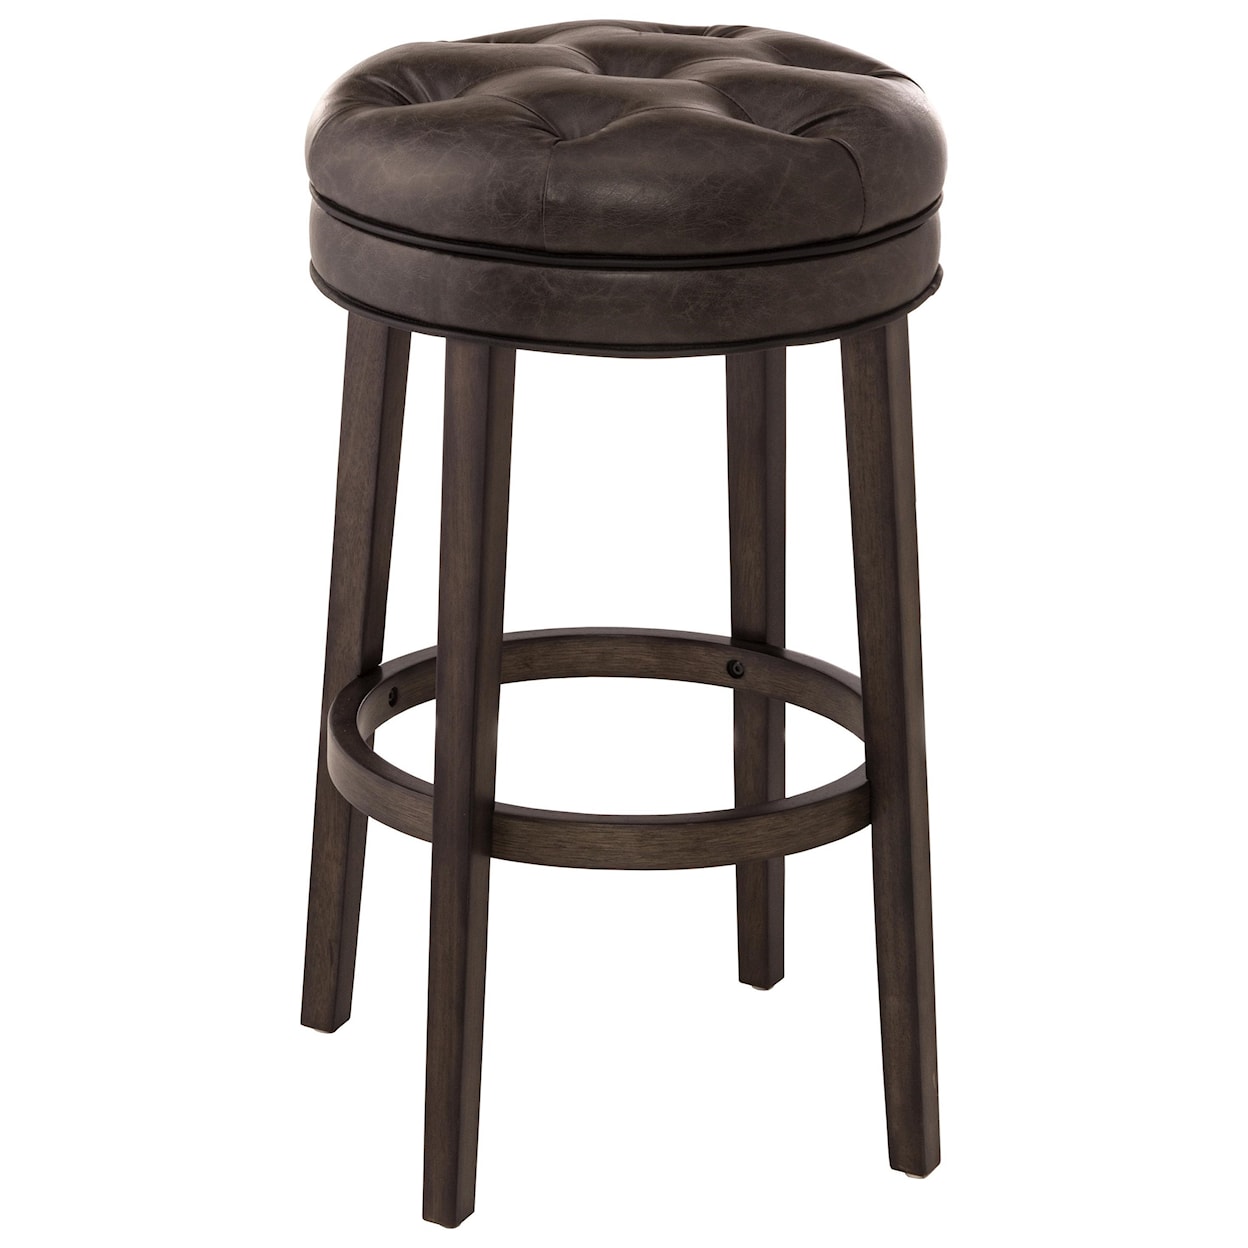 Hillsdale Backless Bar Stools Backless Swivel Counter Stool